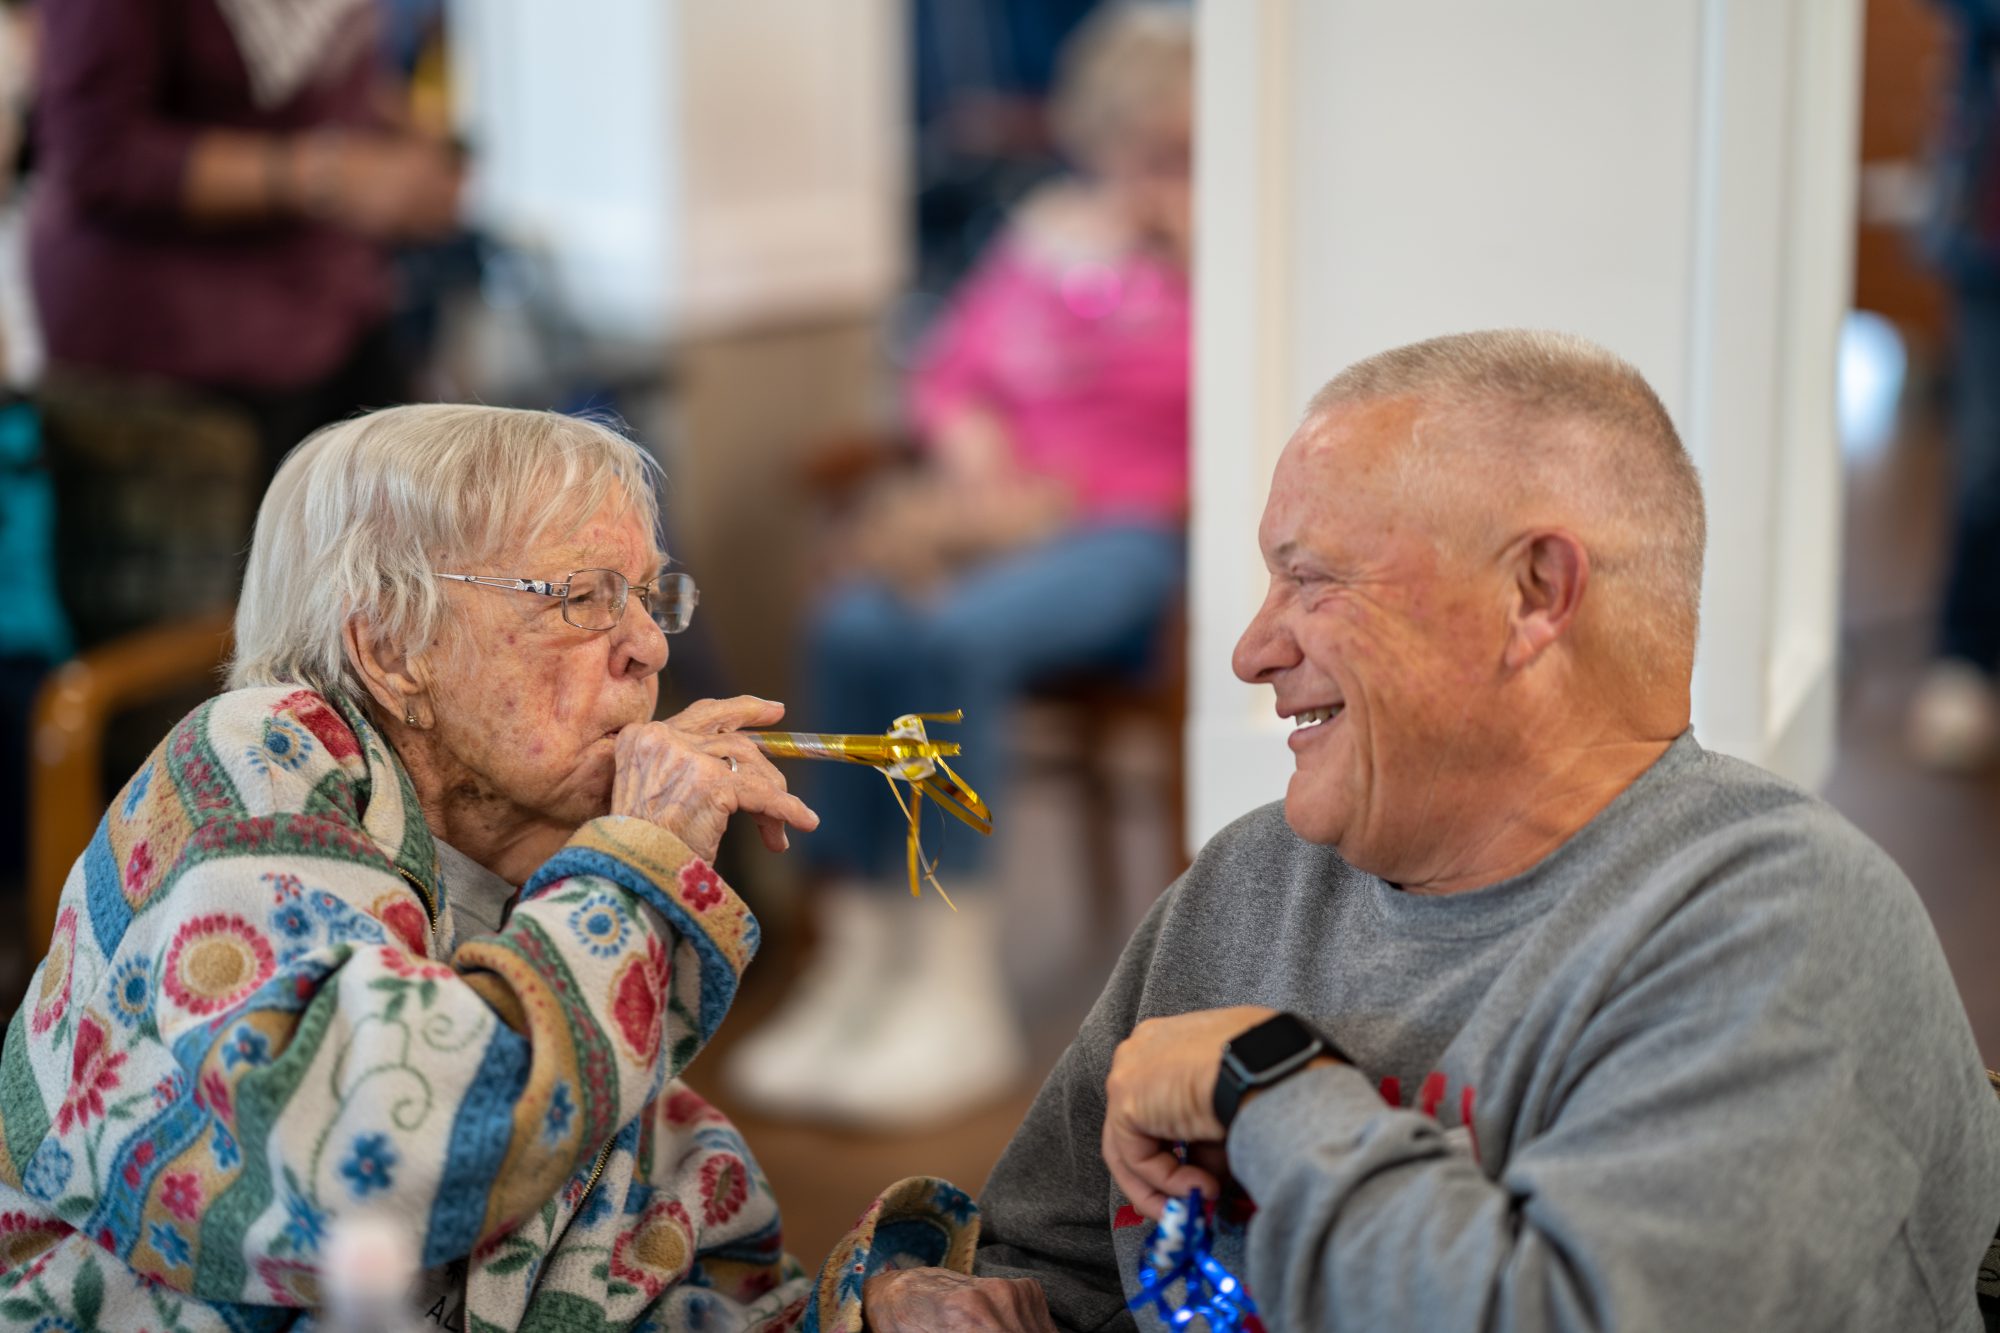 A woman blowing a party horn at a man while he laughs